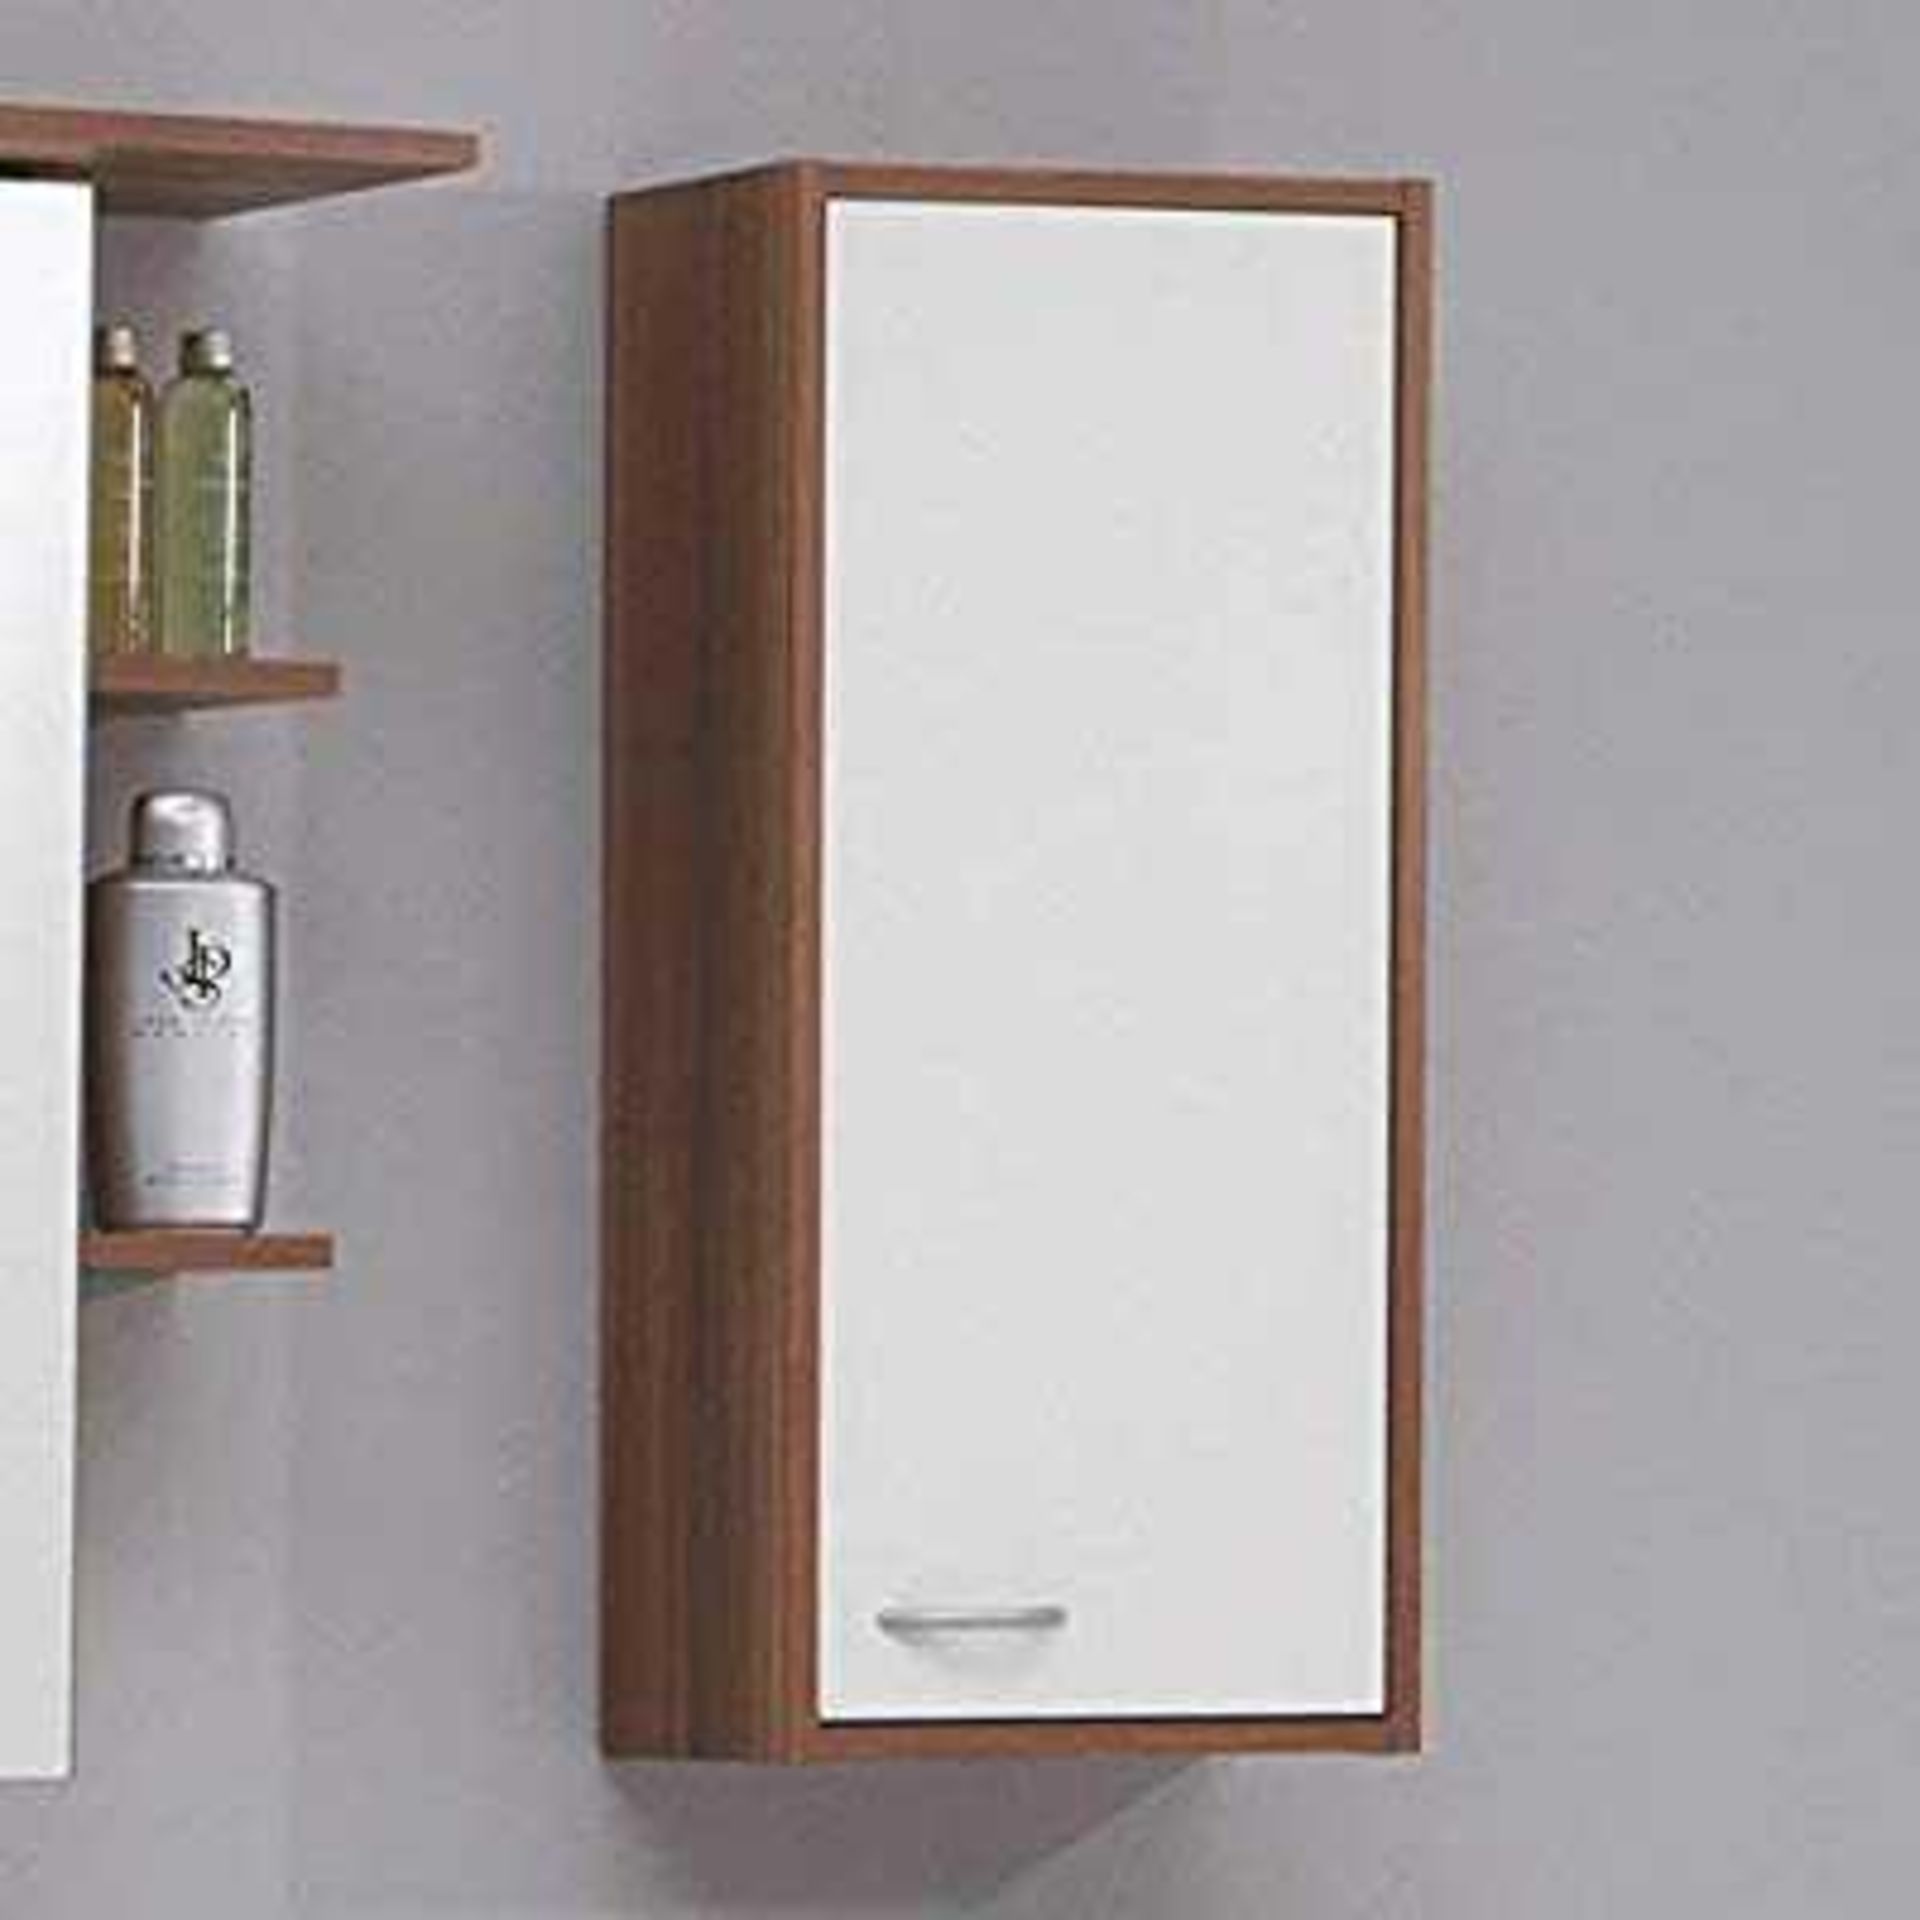 RRP £70. Boxed Fmd Madrid 1 Wall Mounted Cabinet - White